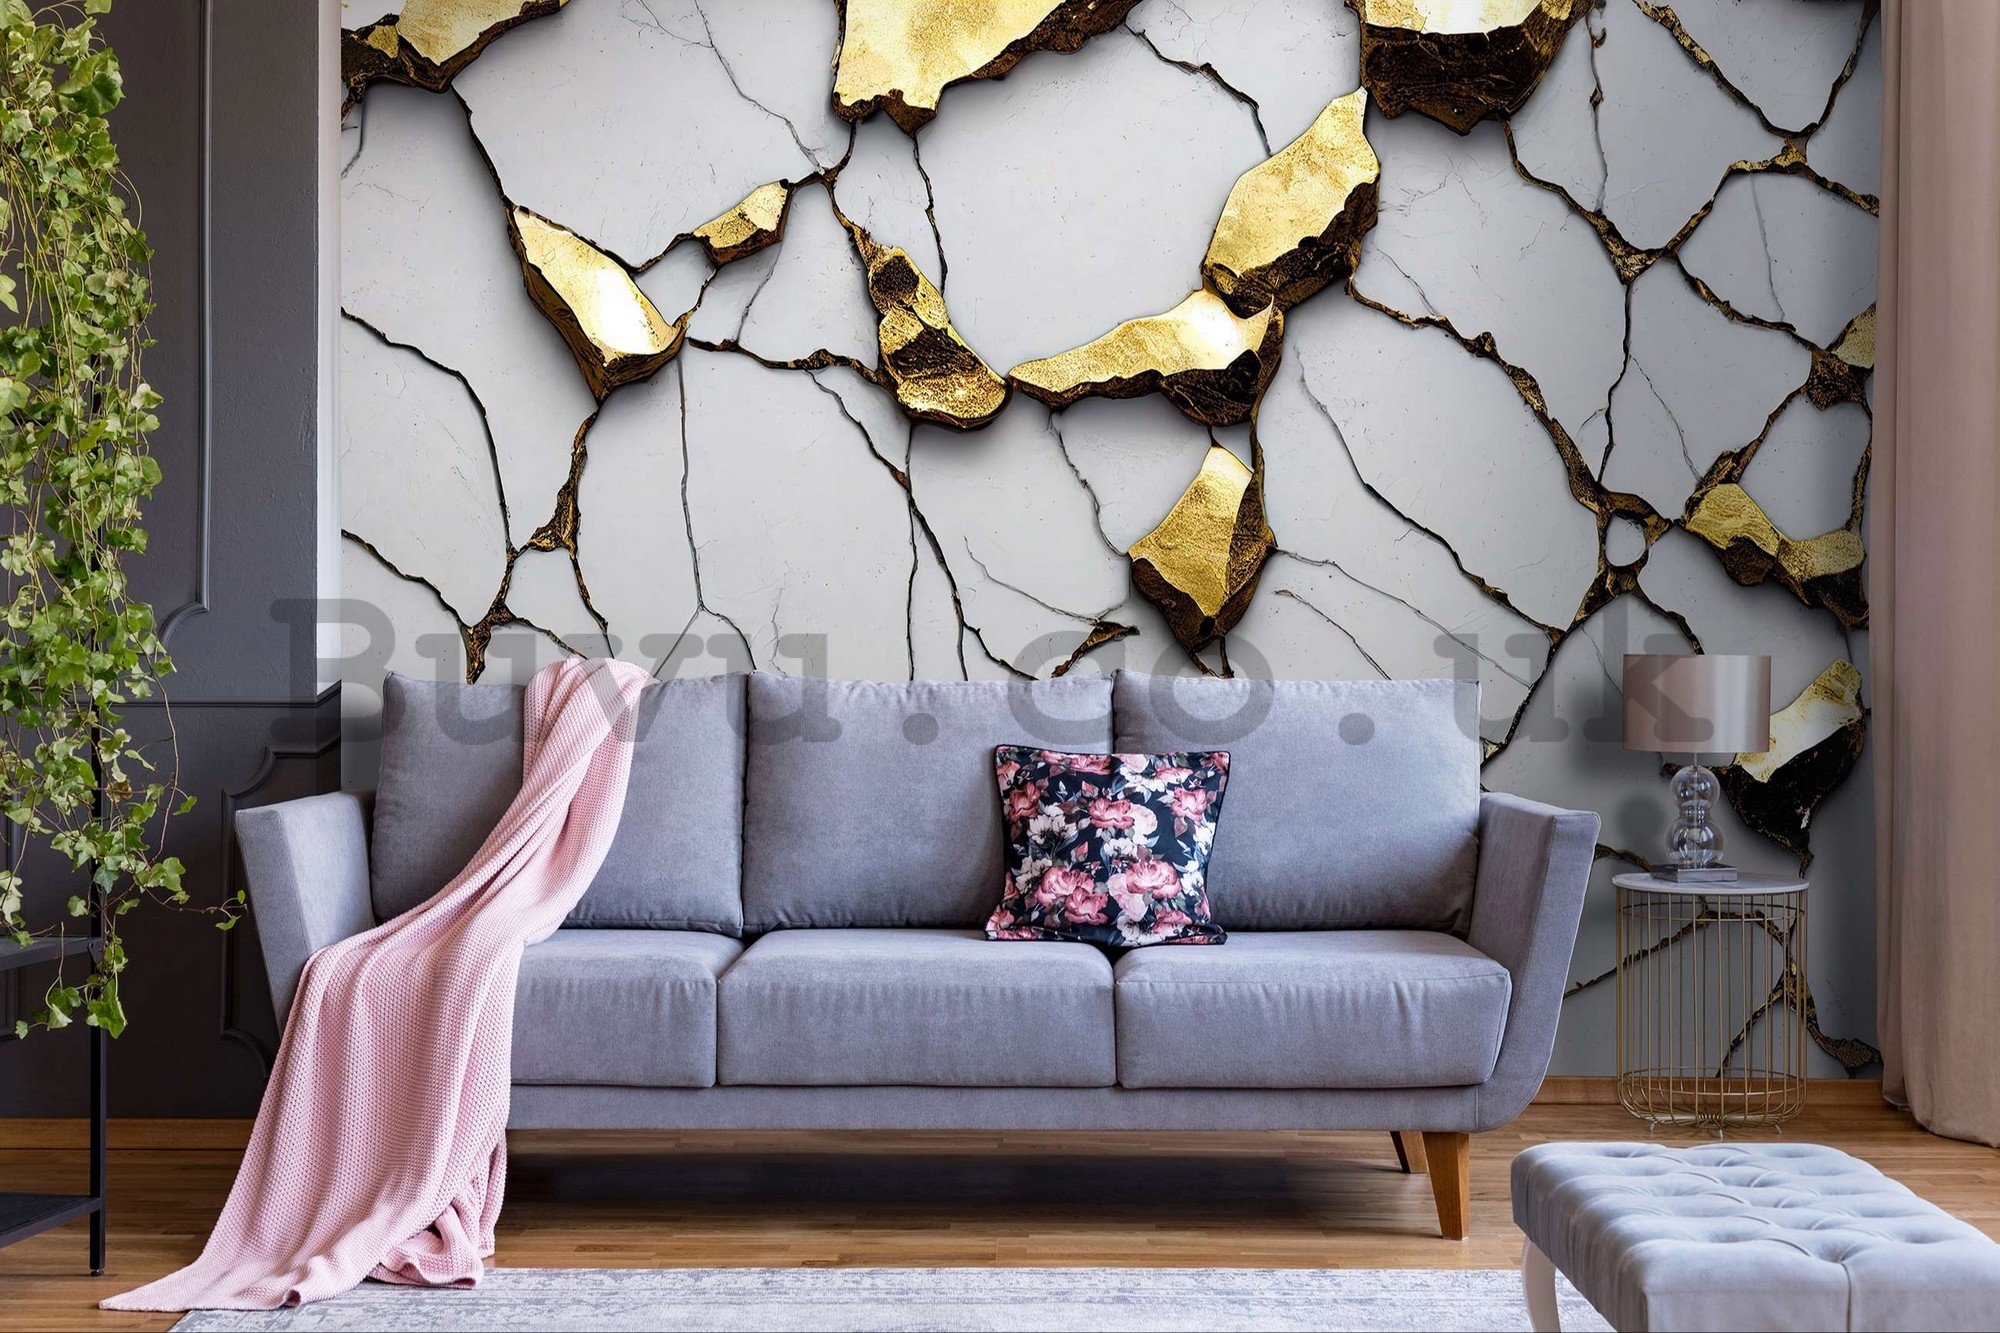 Wall mural vlies: Glamor imitation of golden marble with a white wall - 416x254 cm